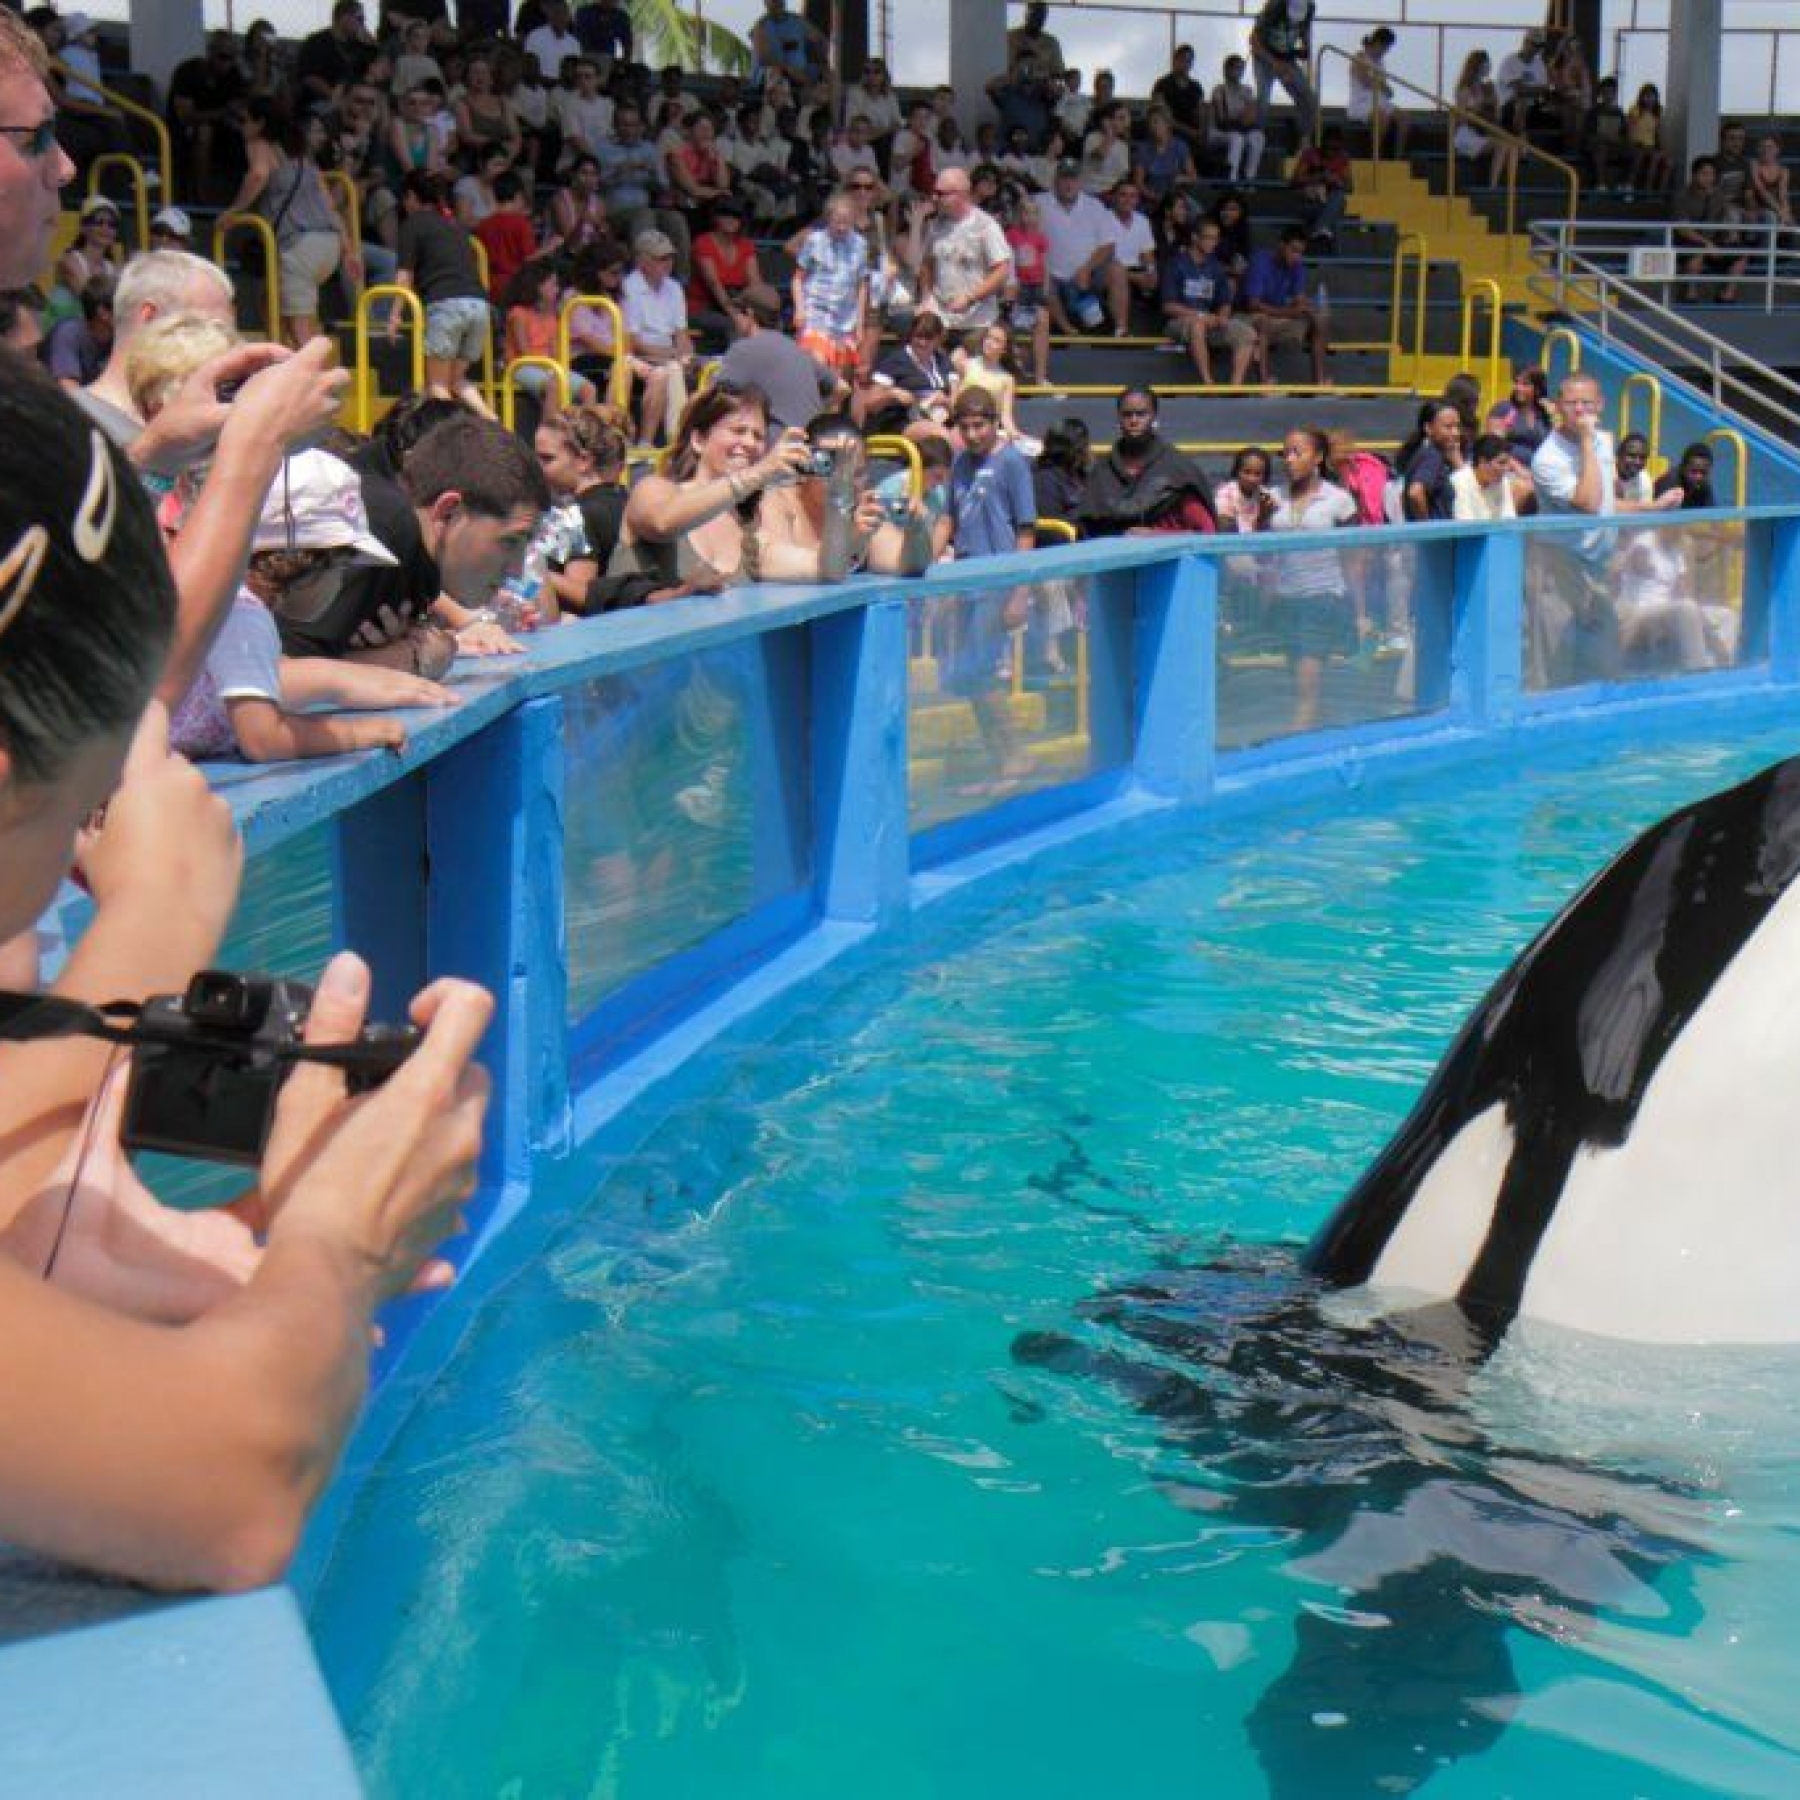 Lolita the killer whale, pictured during her 40th anniversary performance at the Miami Seaquarium